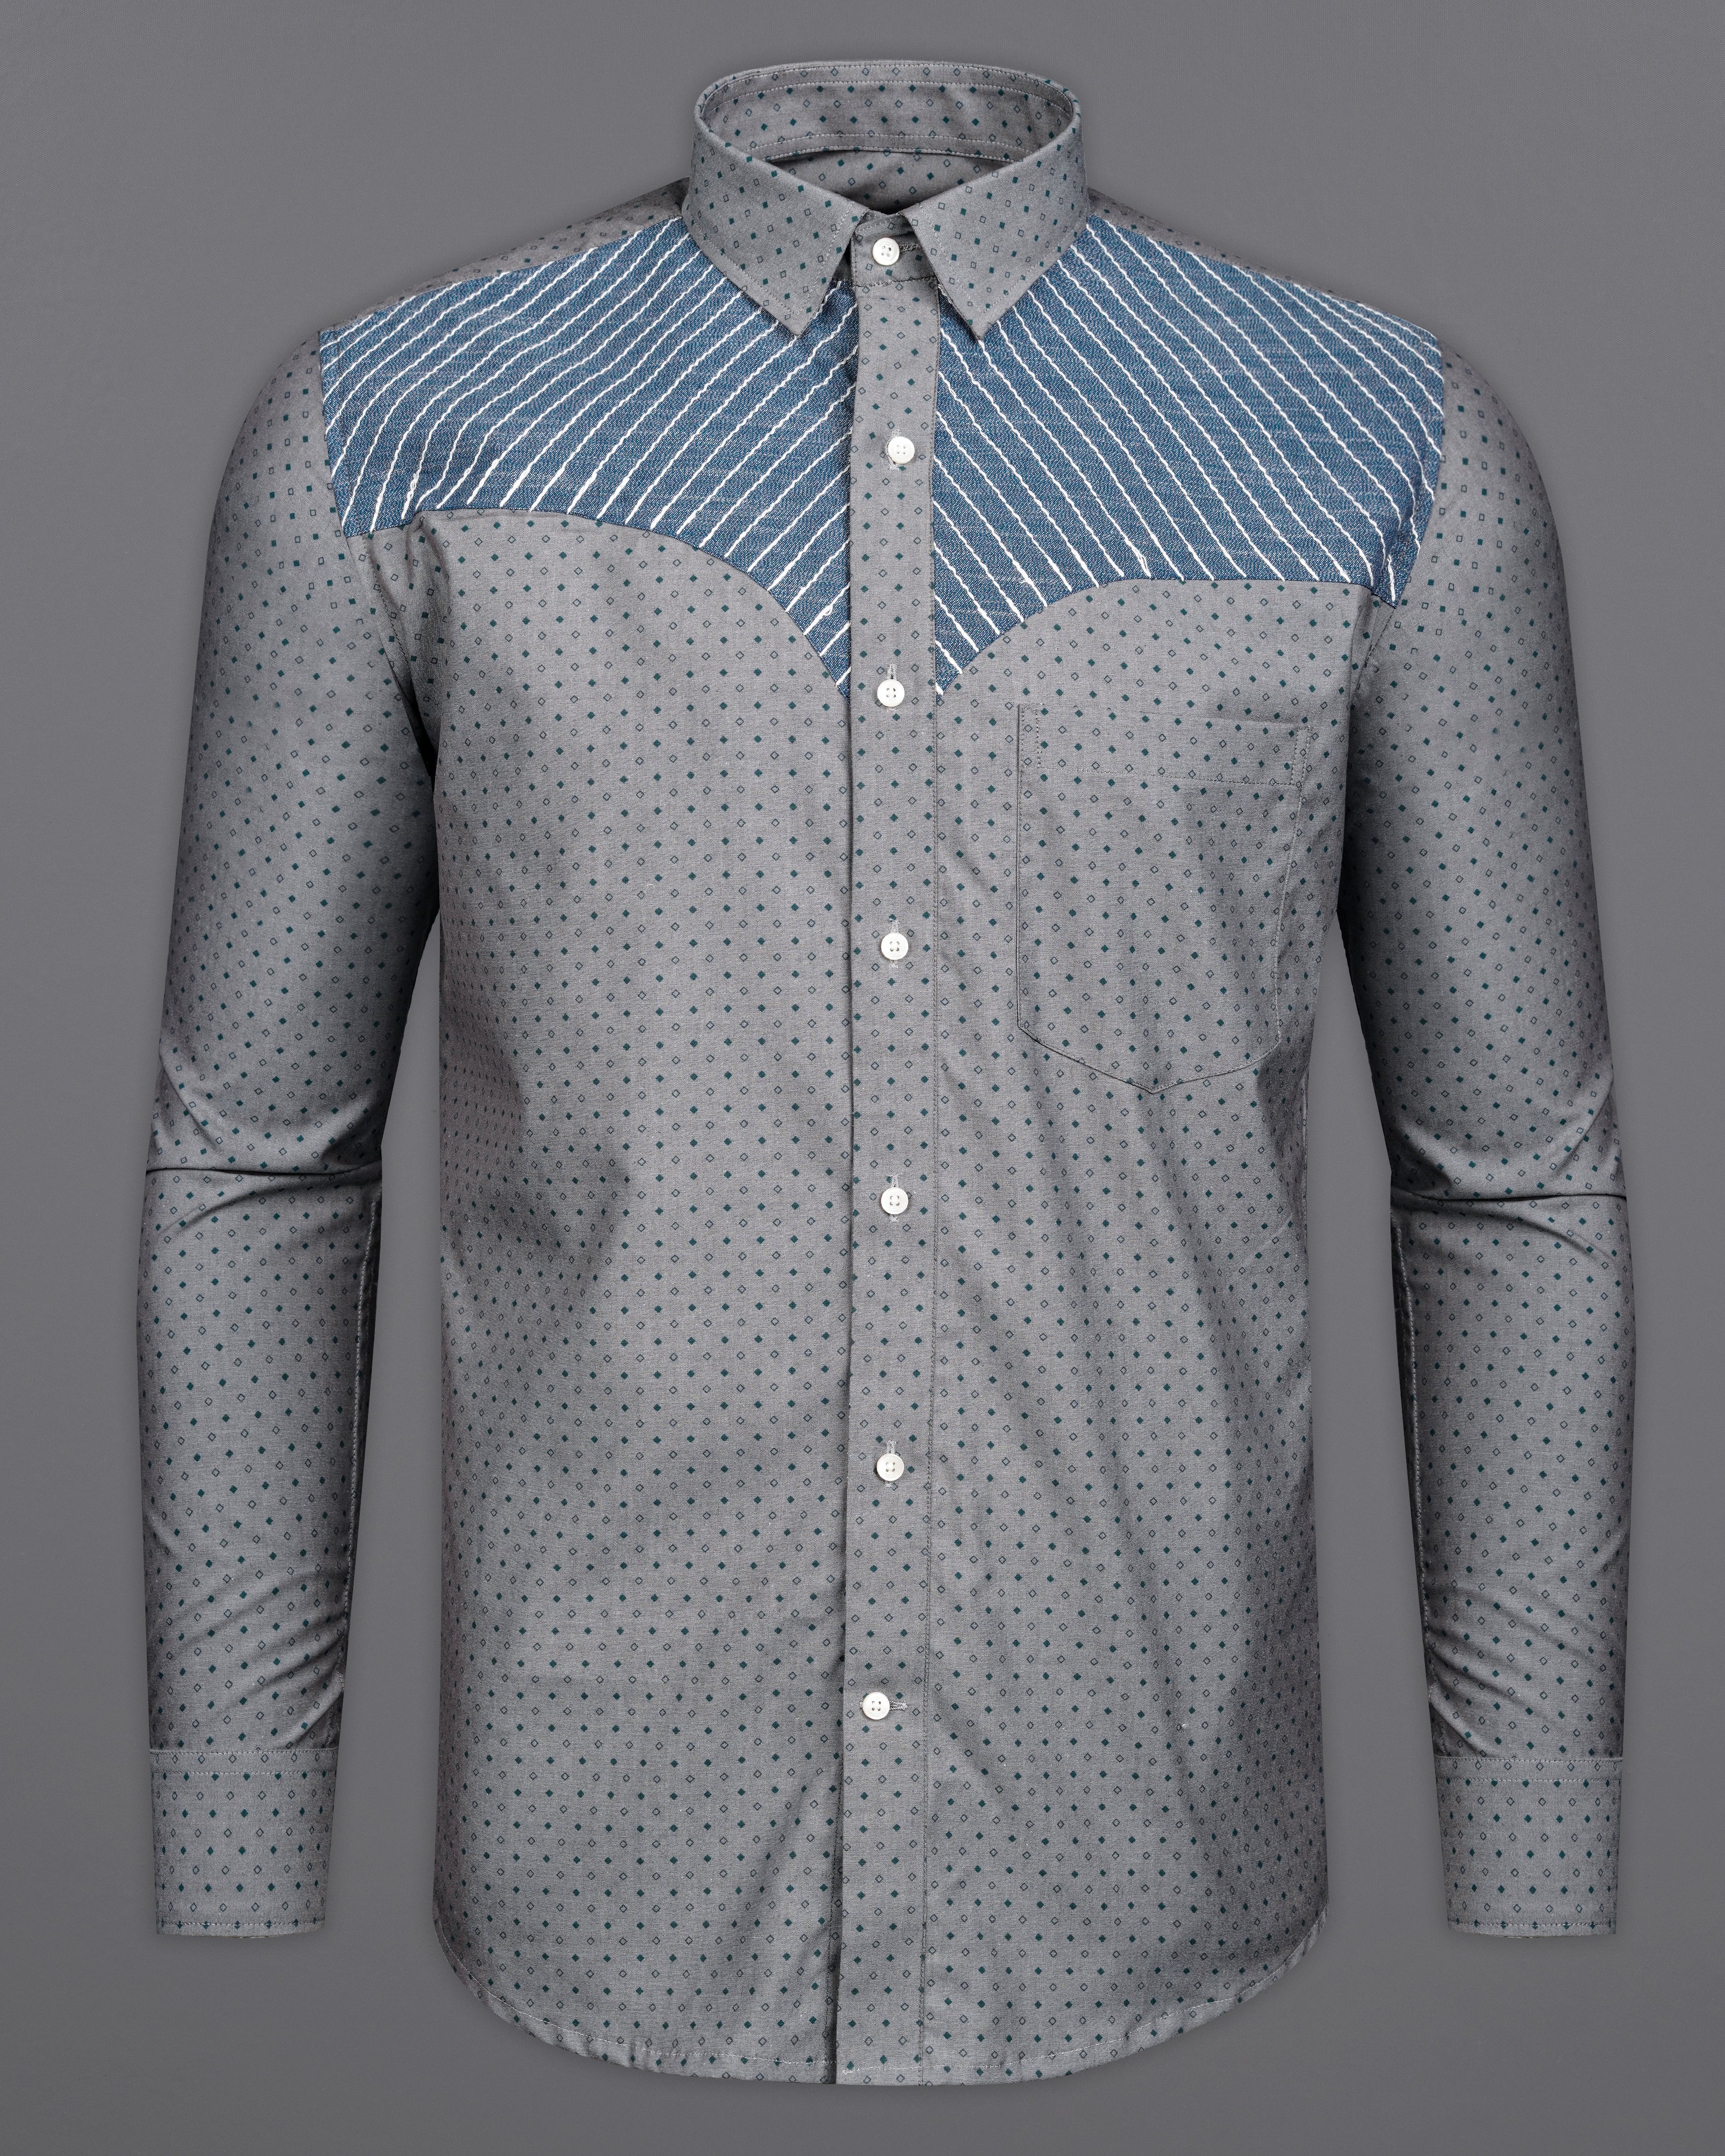 Mountain Gray with Plantation Blue Patchwork Premium Cotton Designer Shirt 9865-P318-38, 9865-P318-H-38, 9865-P318-39, 9865-P318-H-39, 9865-P318-40, 9865-P318-H-40, 9865-P318-42, 9865-P318-H-42, 9865-P318-44, 9865-P318-H-44, 9865-P318-46, 9865-P318-H-46, 9865-P318-48, 9865-P318-H-48, 9865-P318-50, 9865-P318-H-50, 9865-P318-52, 9865-P318-H-52